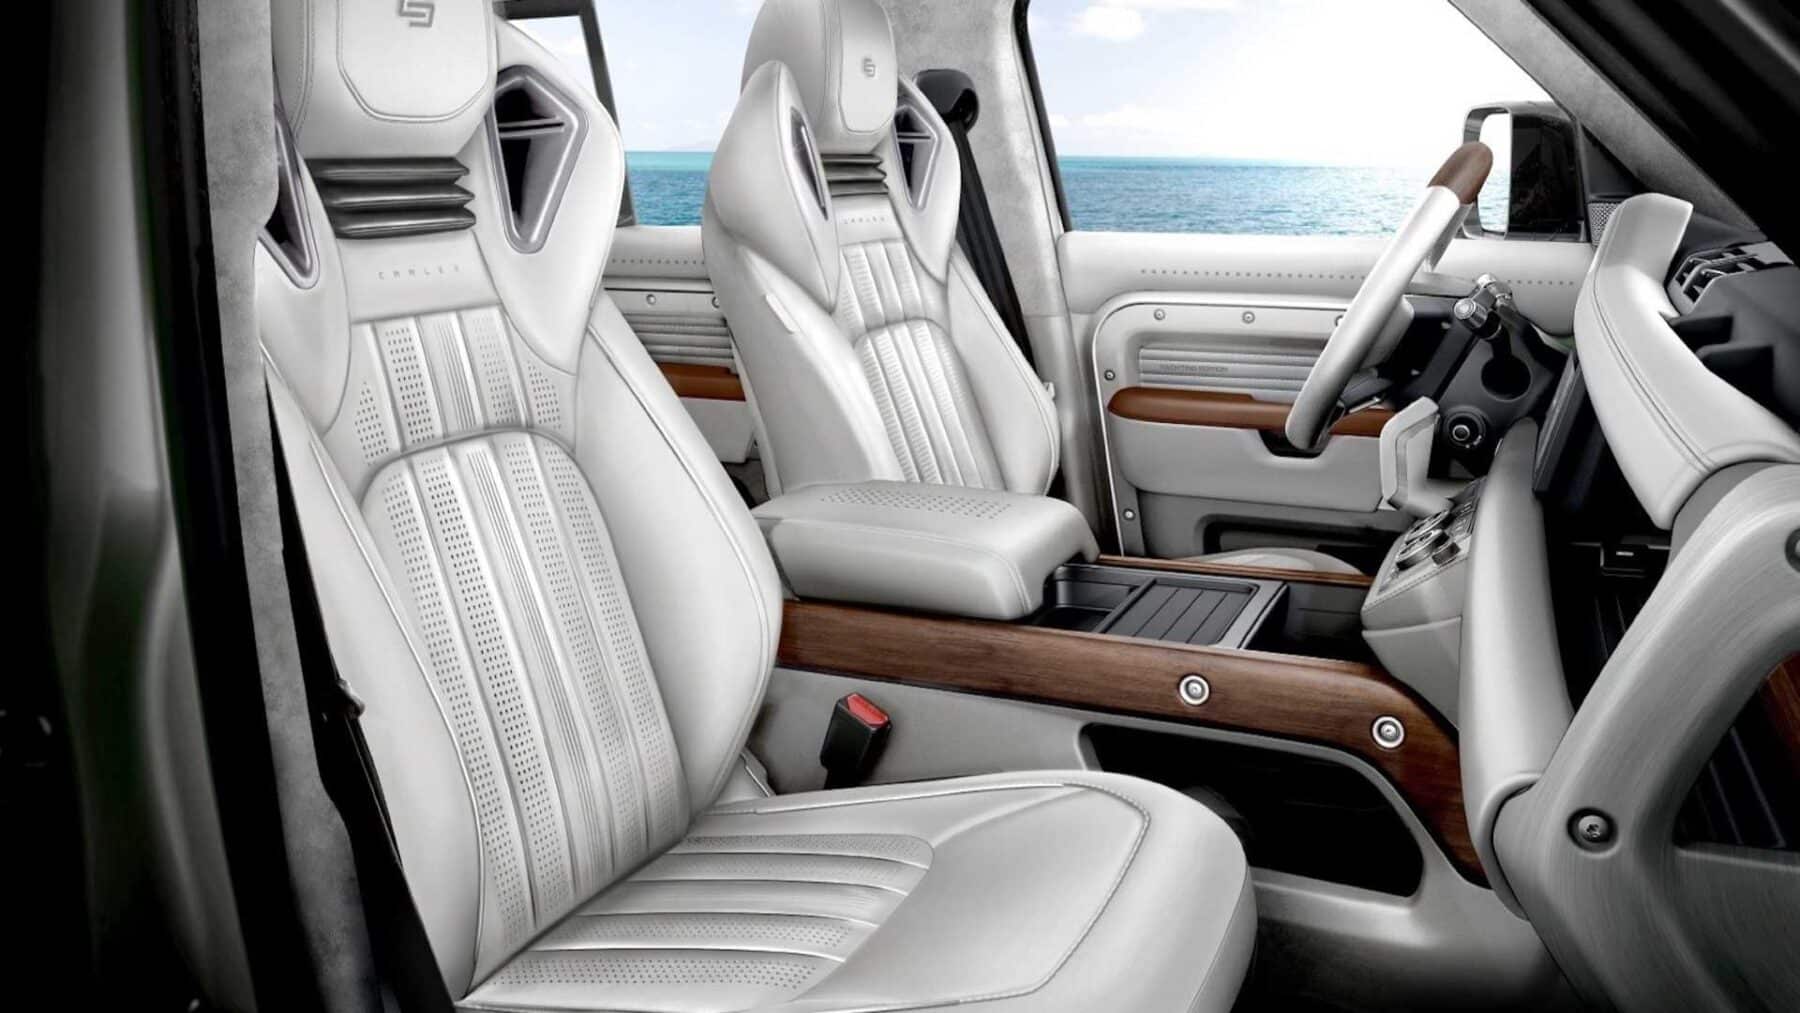 Pure marine luxury in the newly renovated SUV